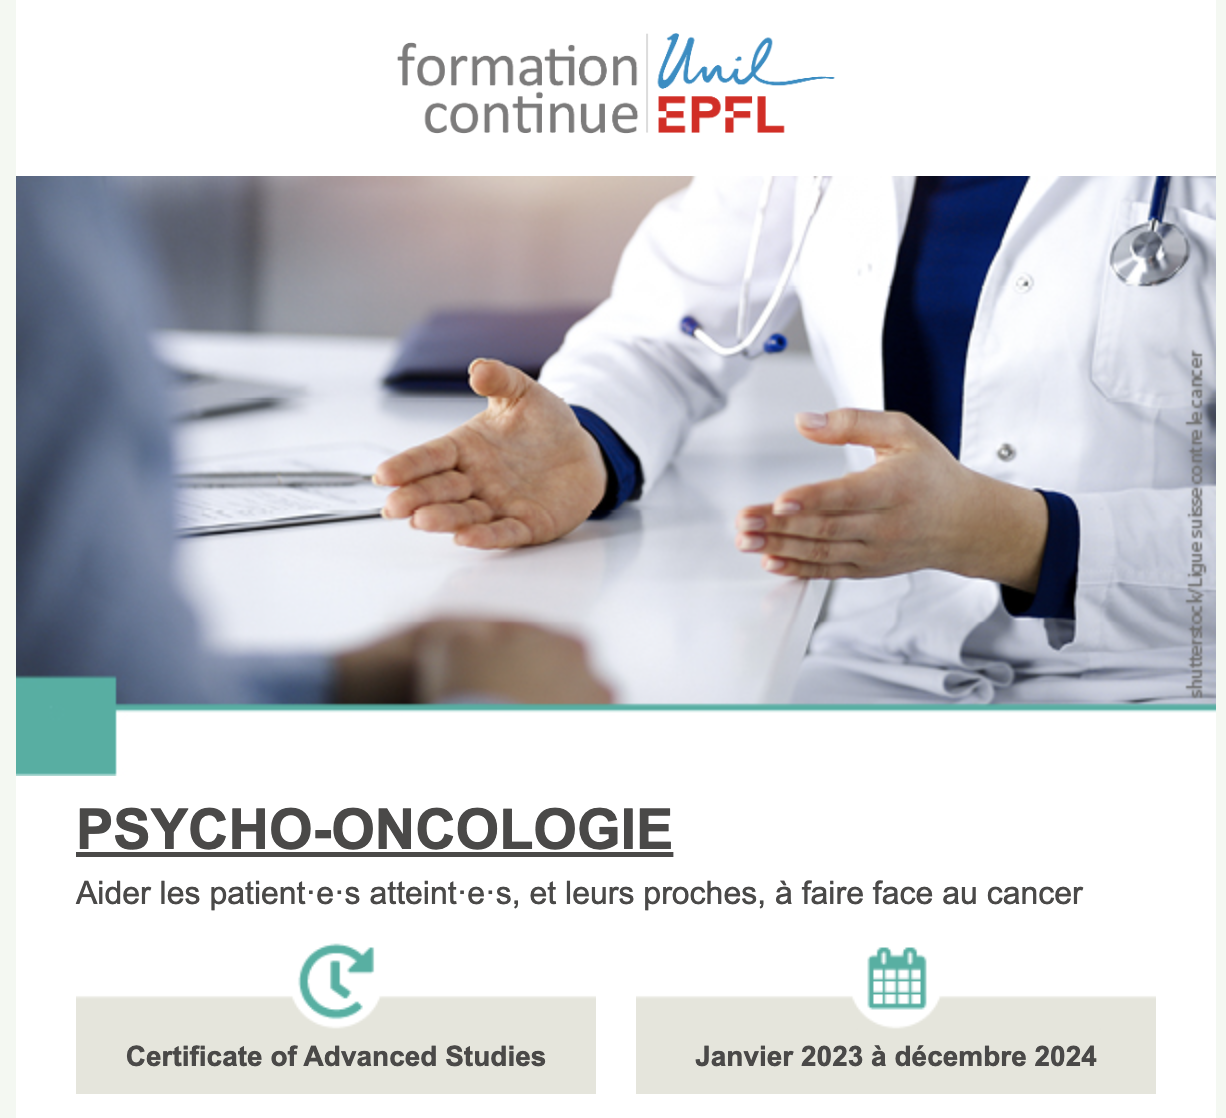 Formation continue UNIL / EPFL – Psycho-oncologie